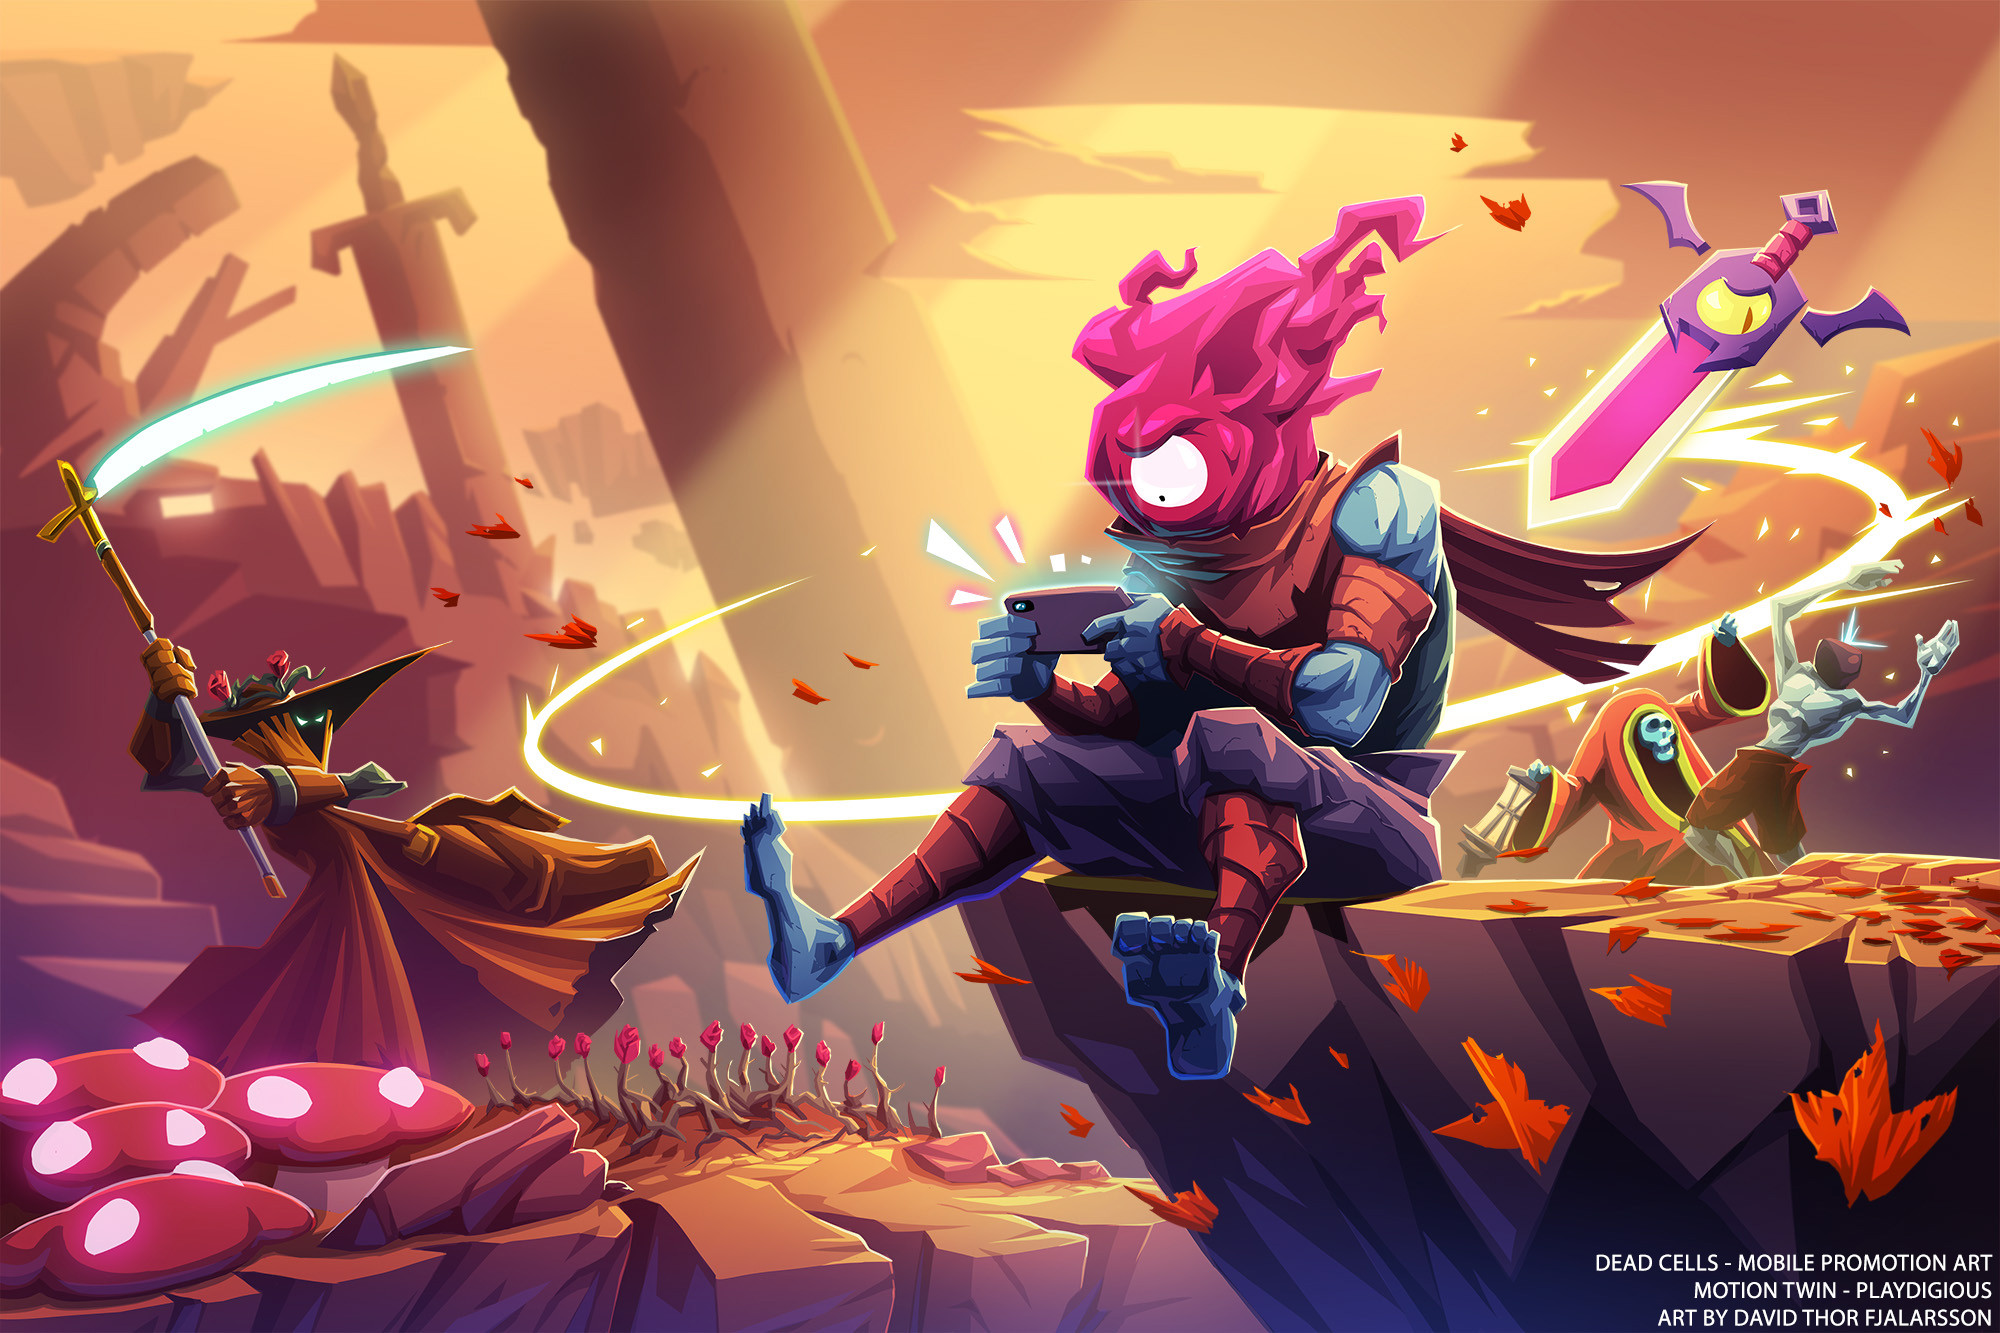 HD wallpaper featuring dynamic Dead Cells game art with vibrant character action for desktop background.